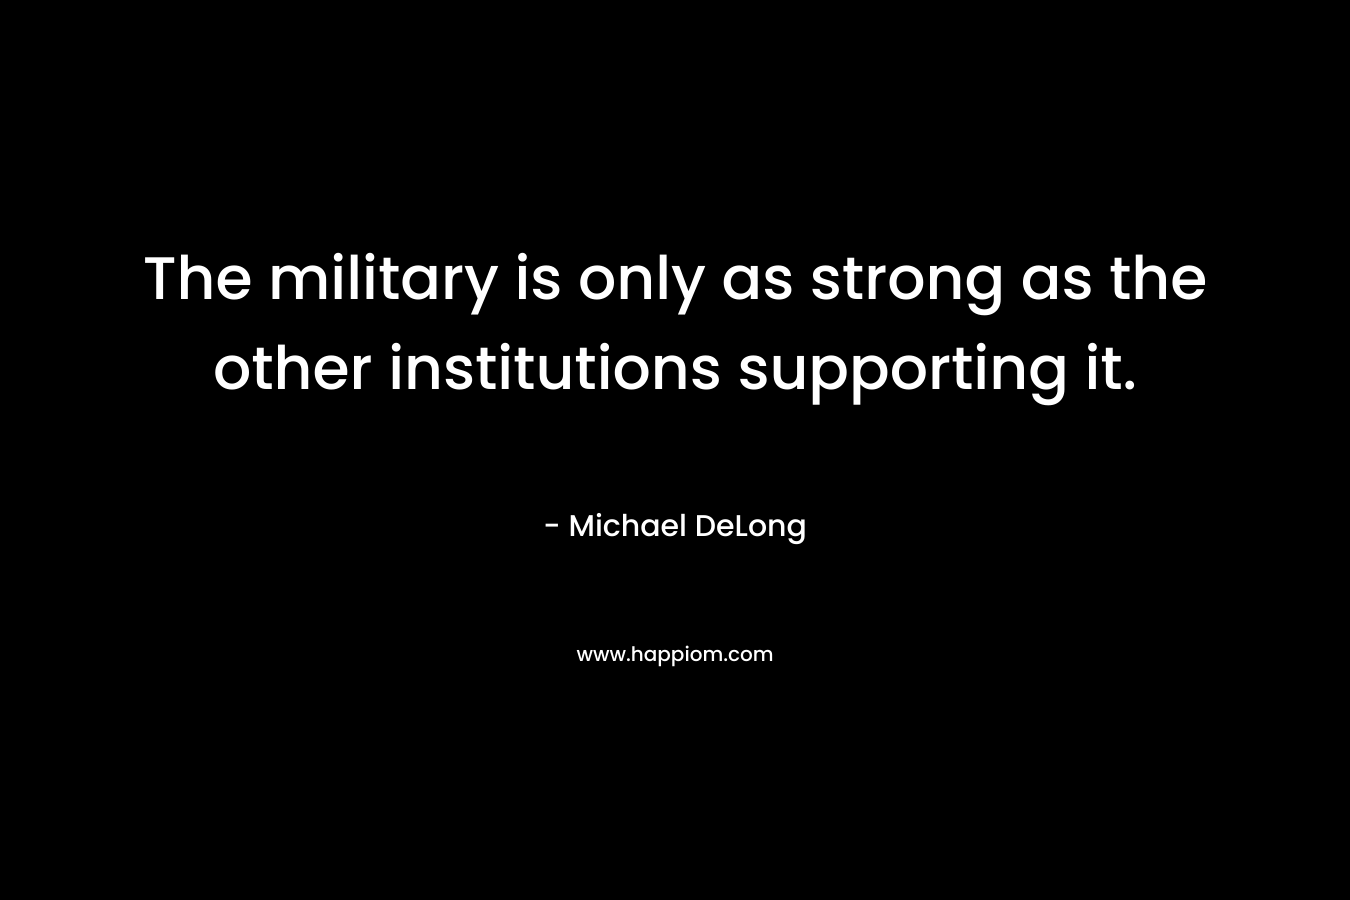 The military is only as strong as the other institutions supporting it. – Michael DeLong